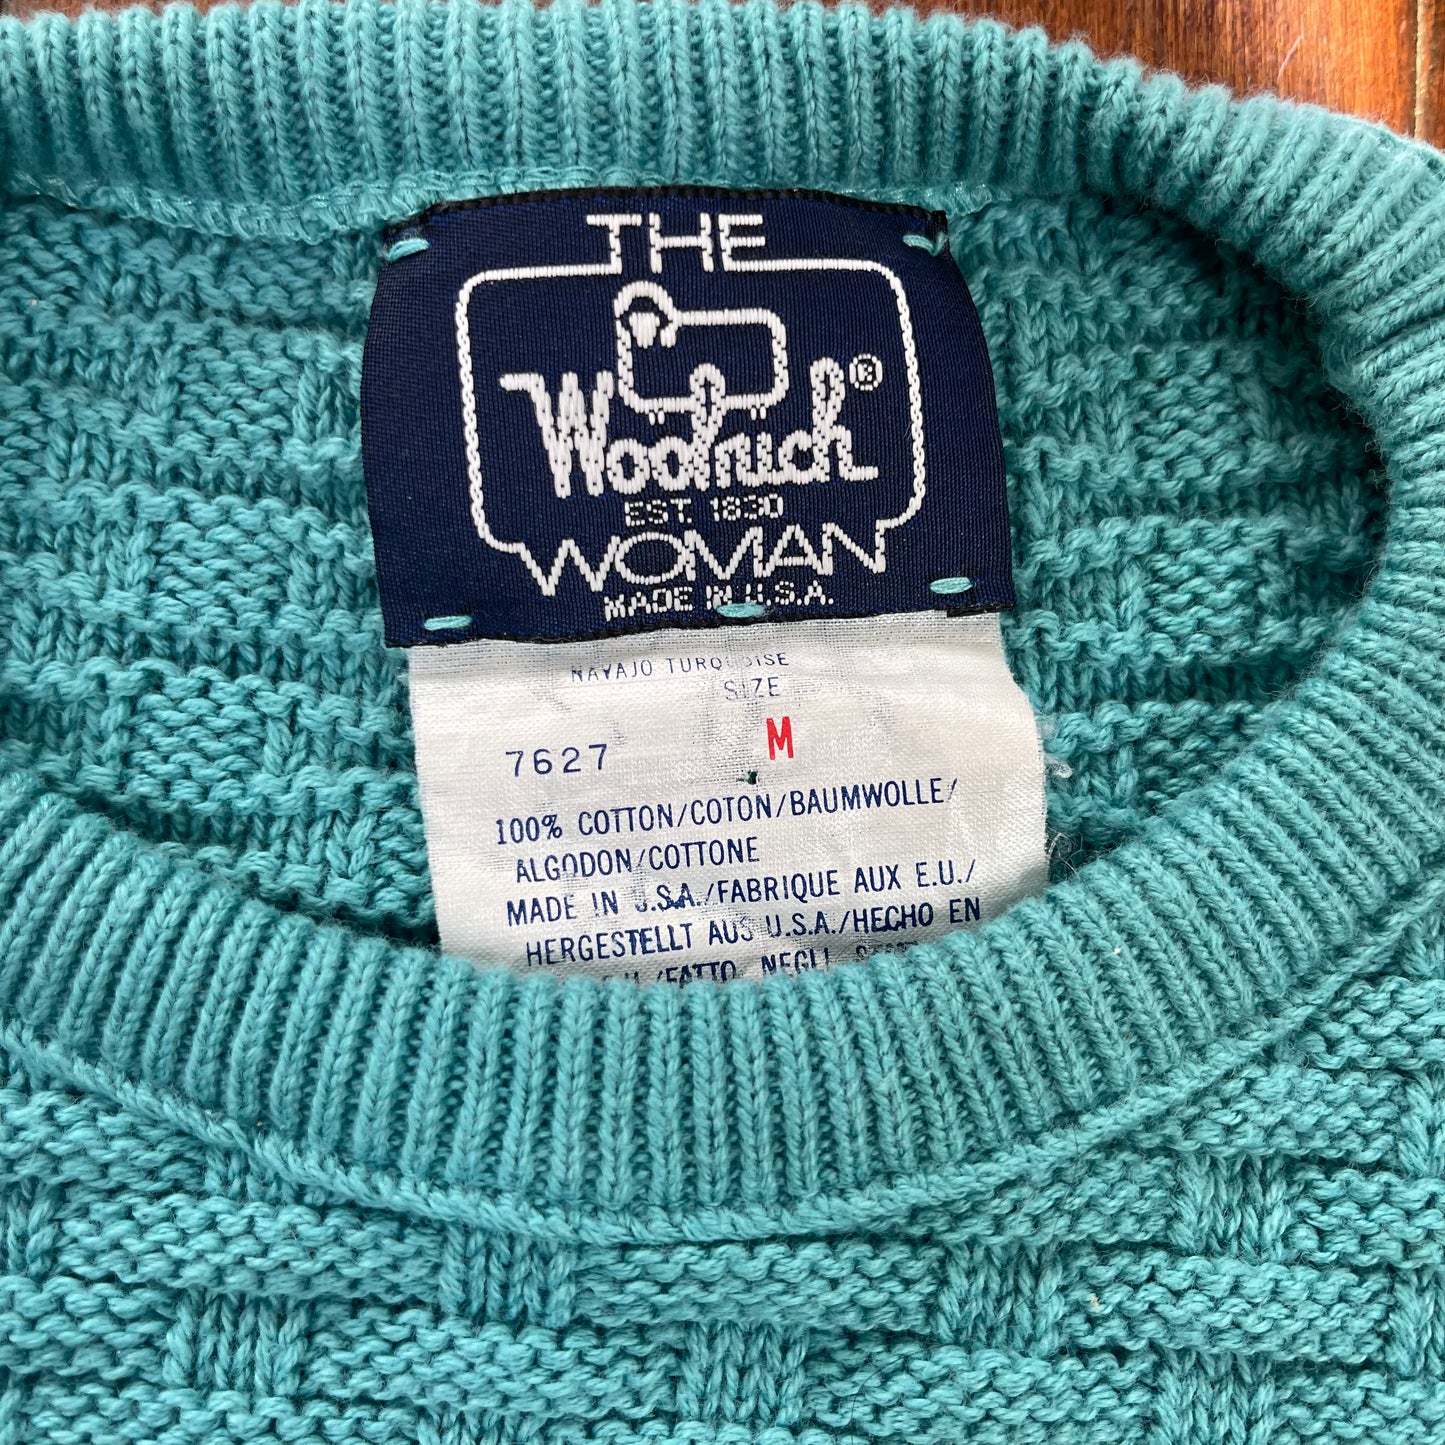 VINTAGE TEAL KNITTED SWEATER